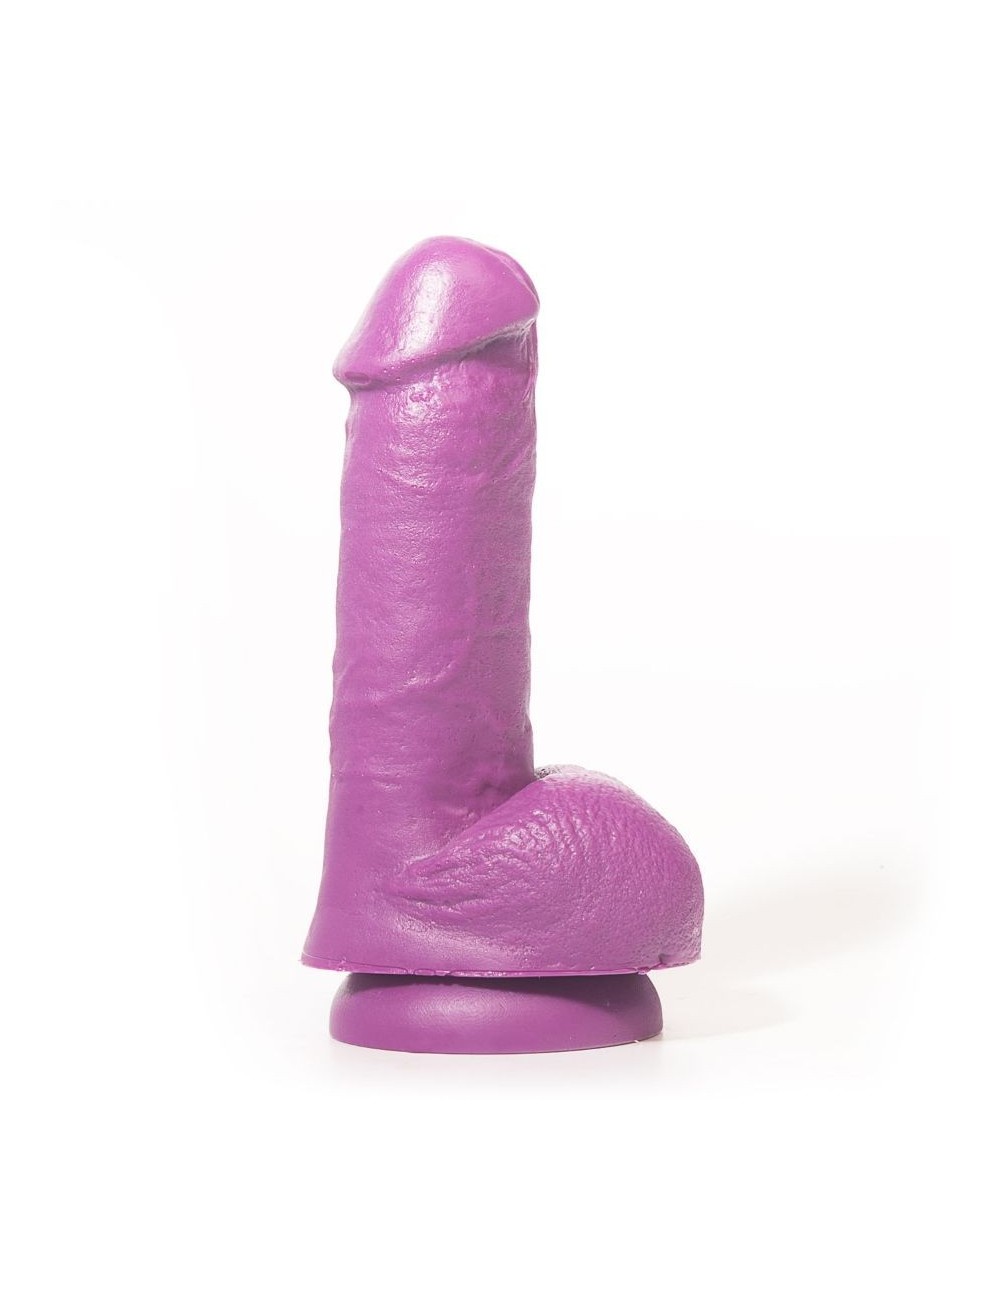 Sextoys - Godes & Plugs - CHAMBRE ROSE NAO REALISTIC DILDO VIOLET 16 CM - Pink Room